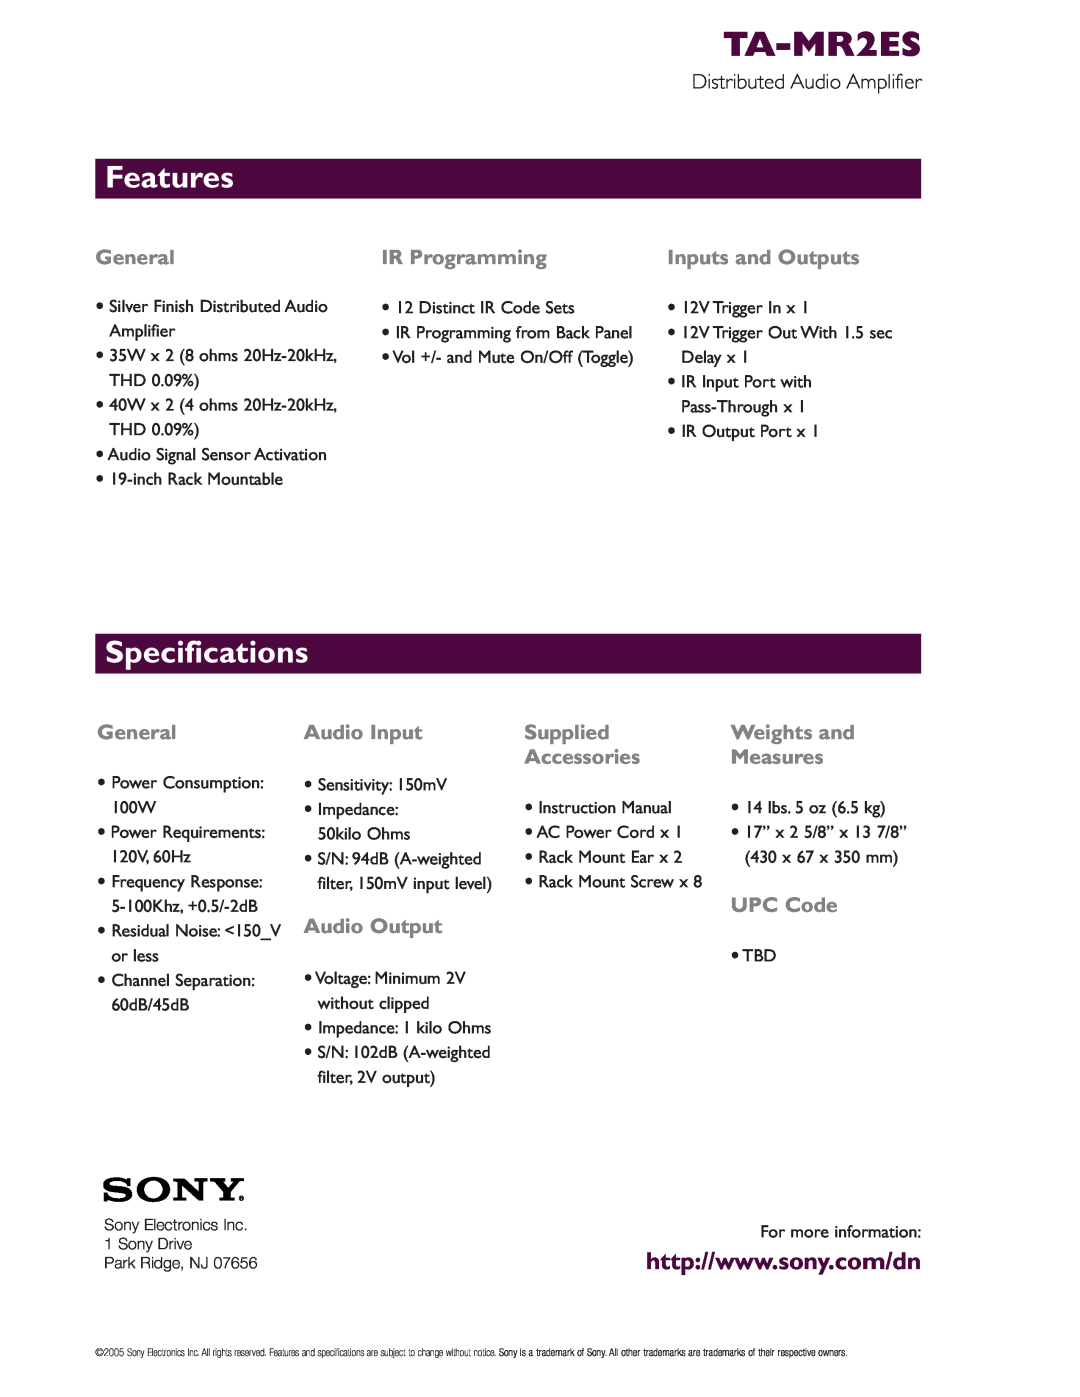 Sony 374, Stereo Amplifier warranty Features, Specifications, TA-MR2ES 